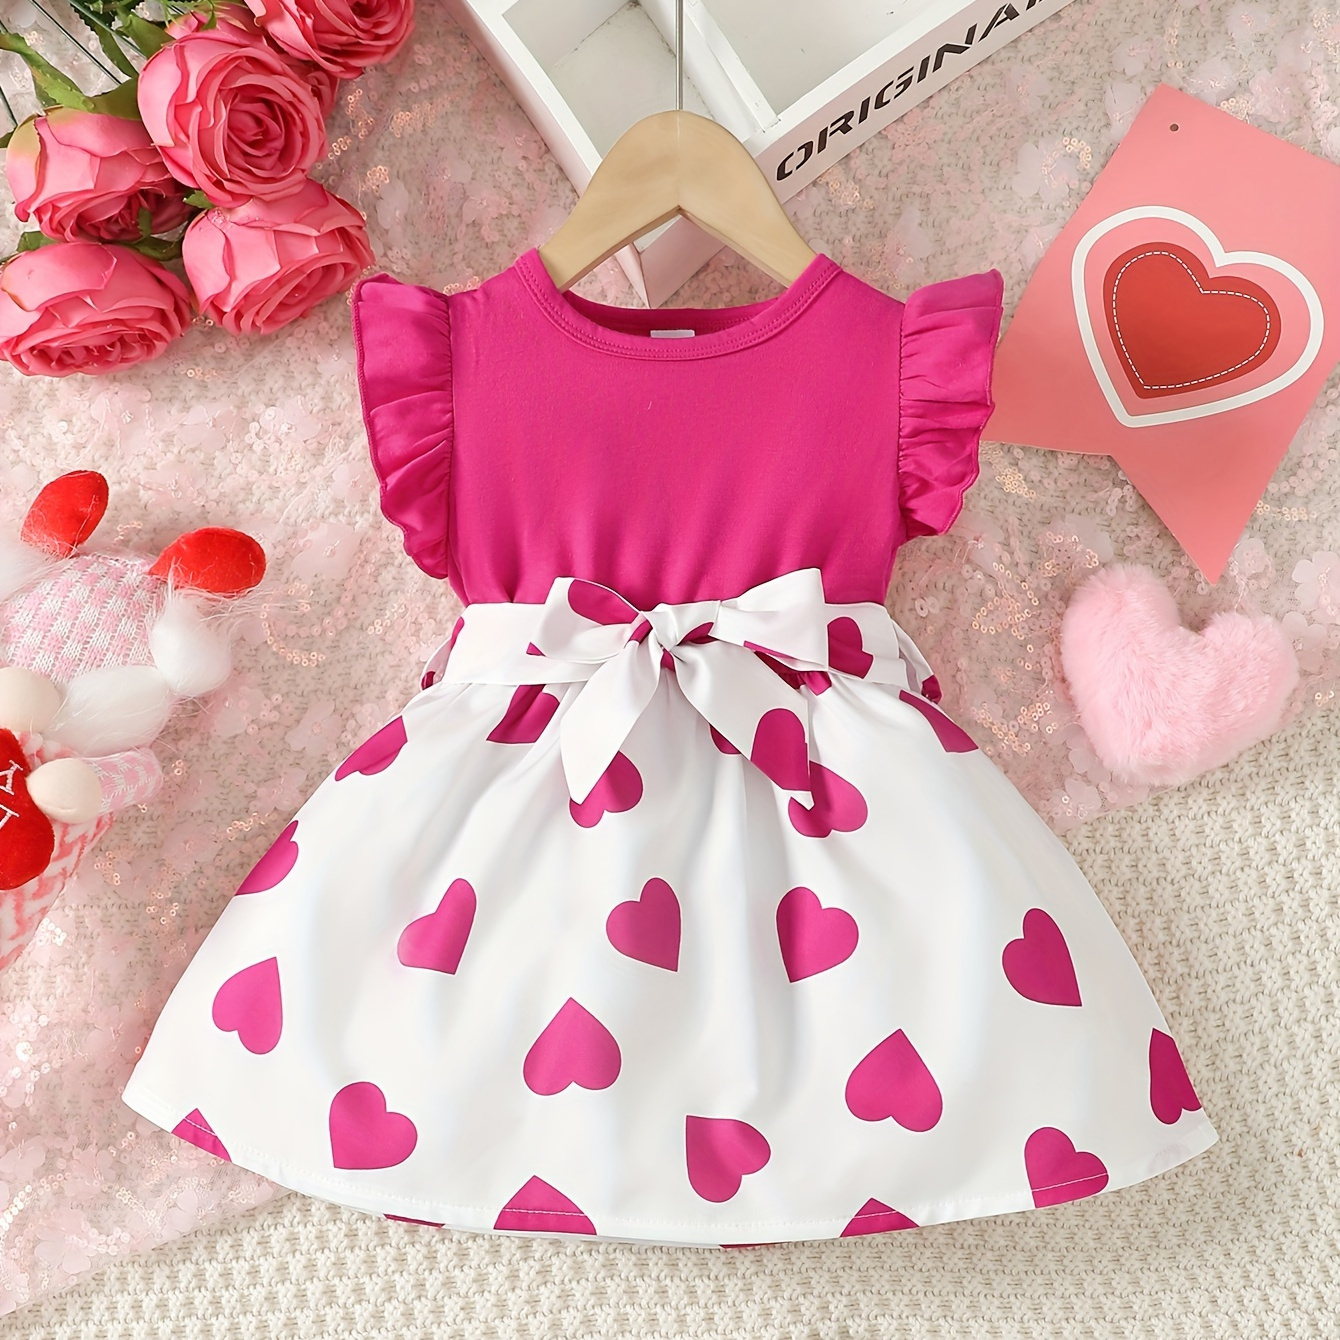 

Baby Girls Fashion Popular Color Love Print With Bow Decor Round Neck Flying Sleeve Dress For Summer